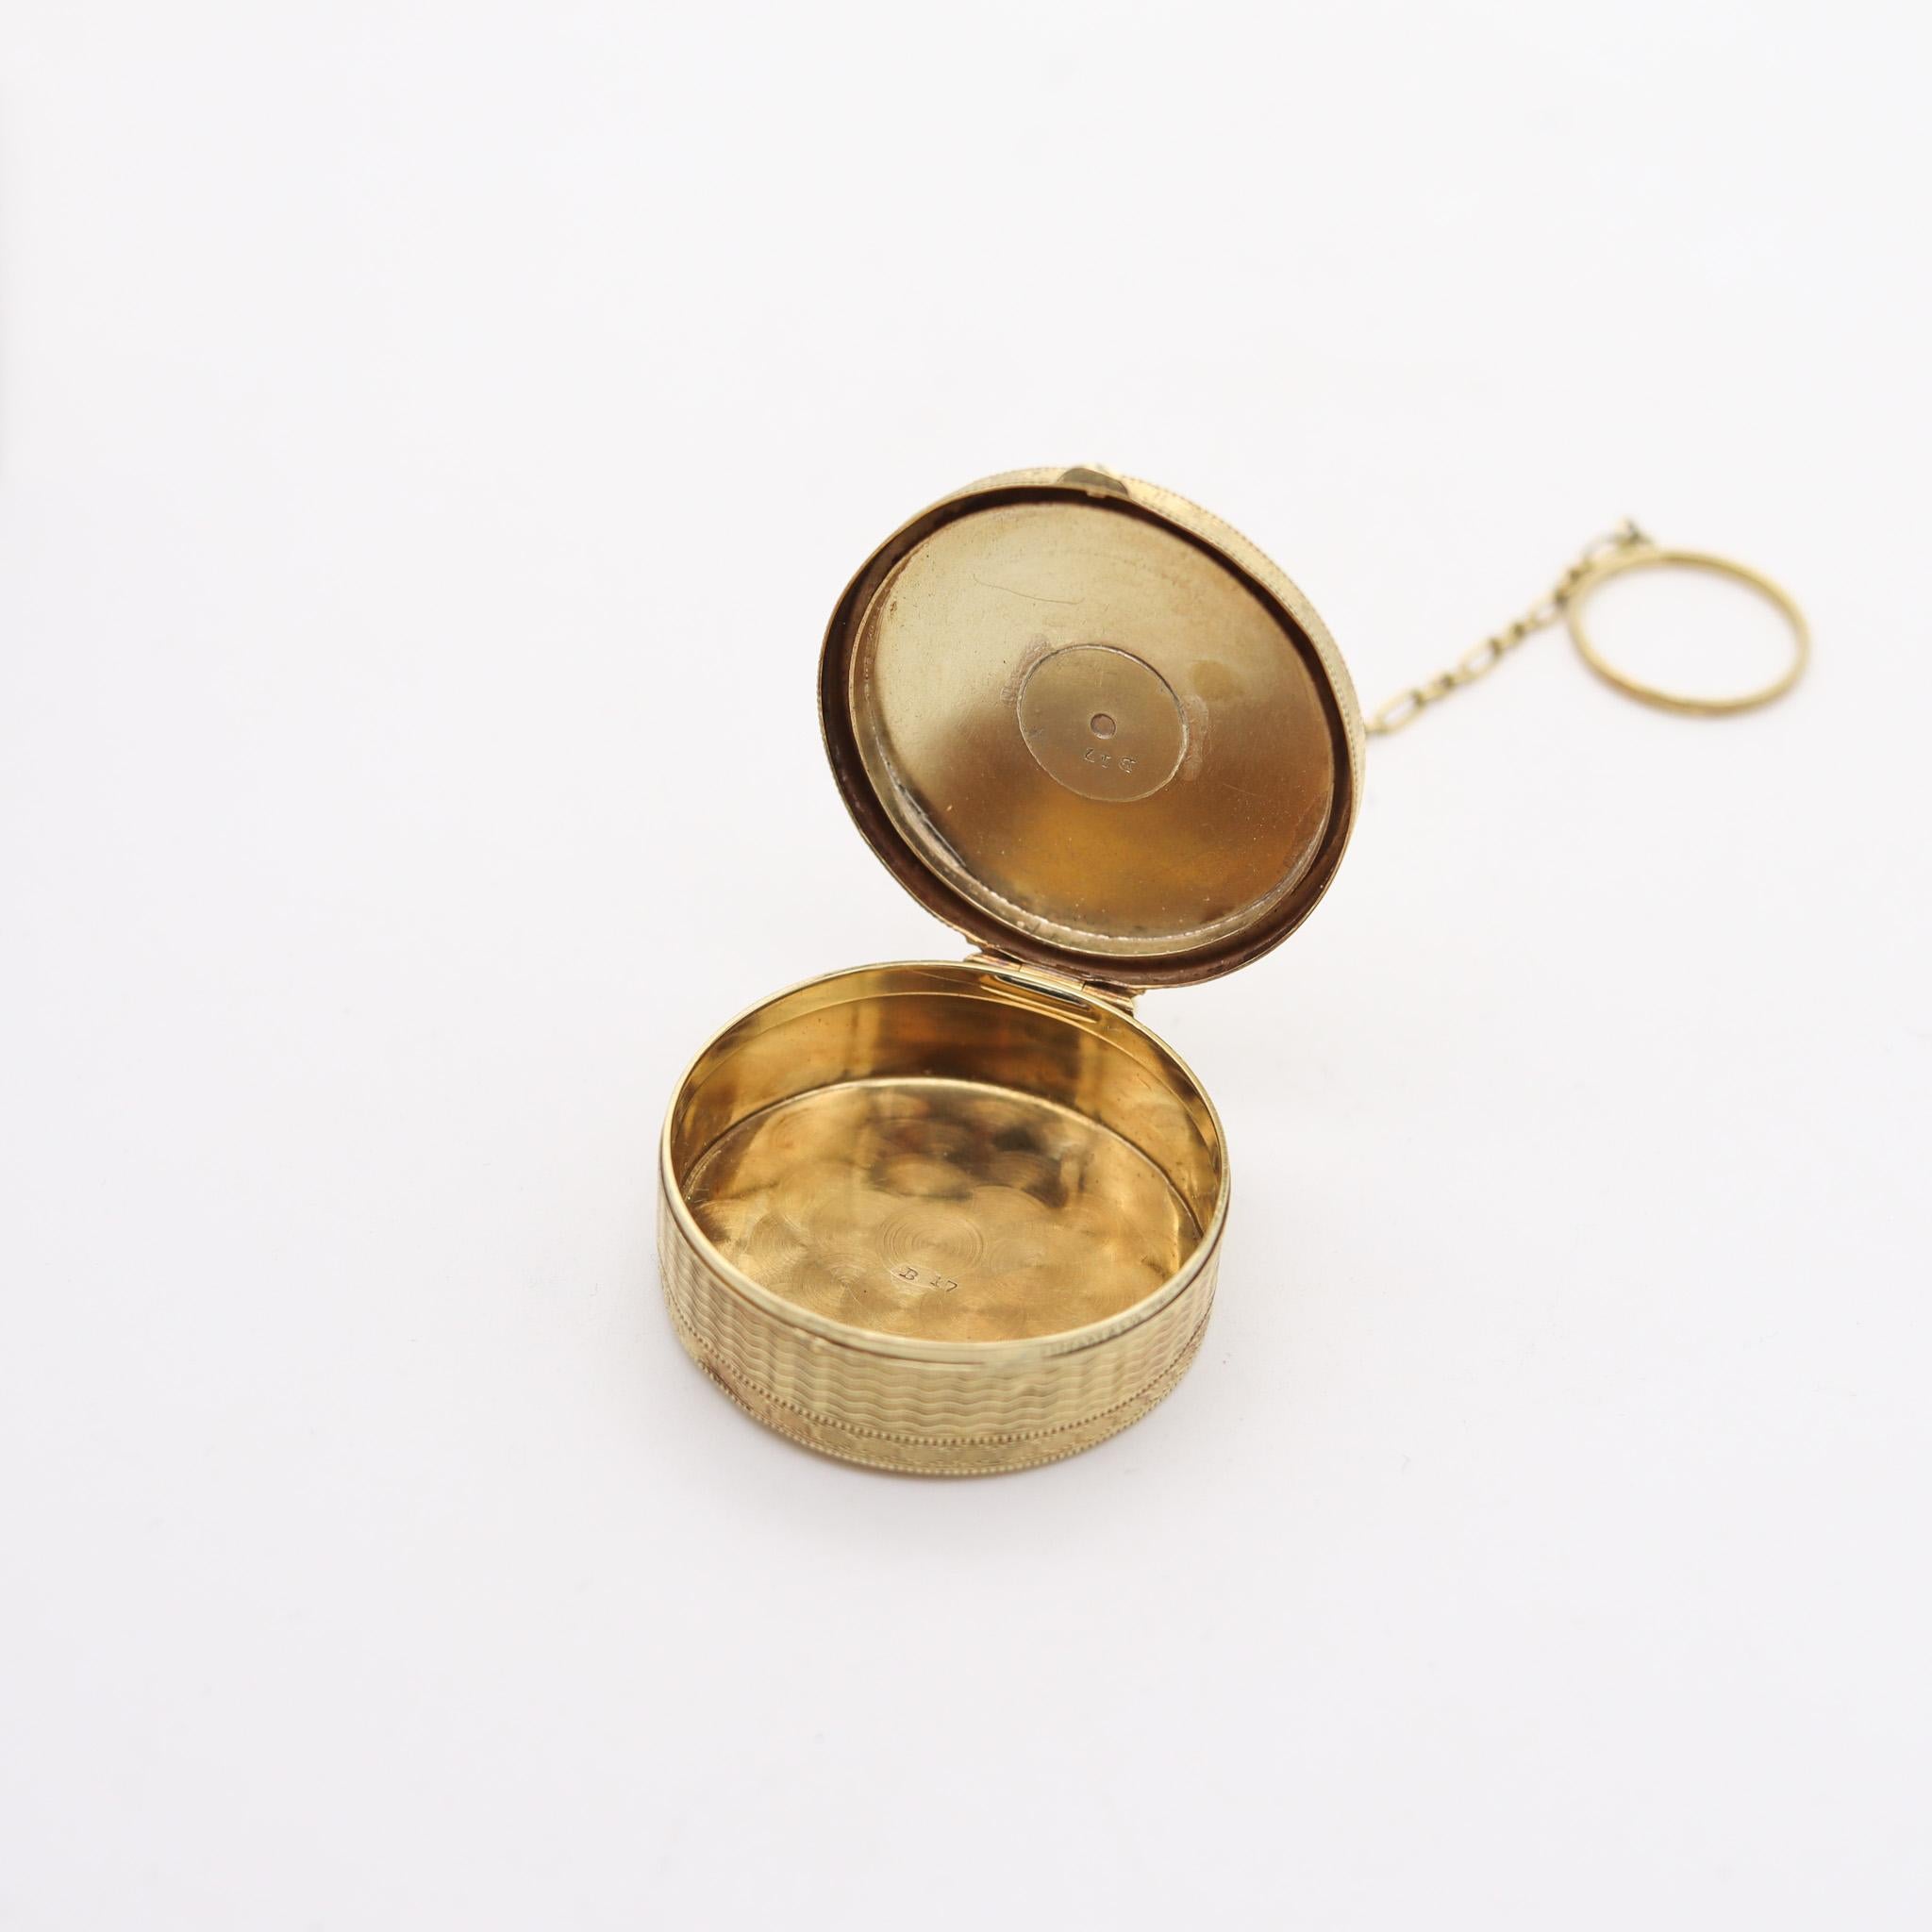 Women's Tiffany & Co. 1910 Edwardian Guilloché Round Pill Box In 14Kt Yellow Gold For Sale